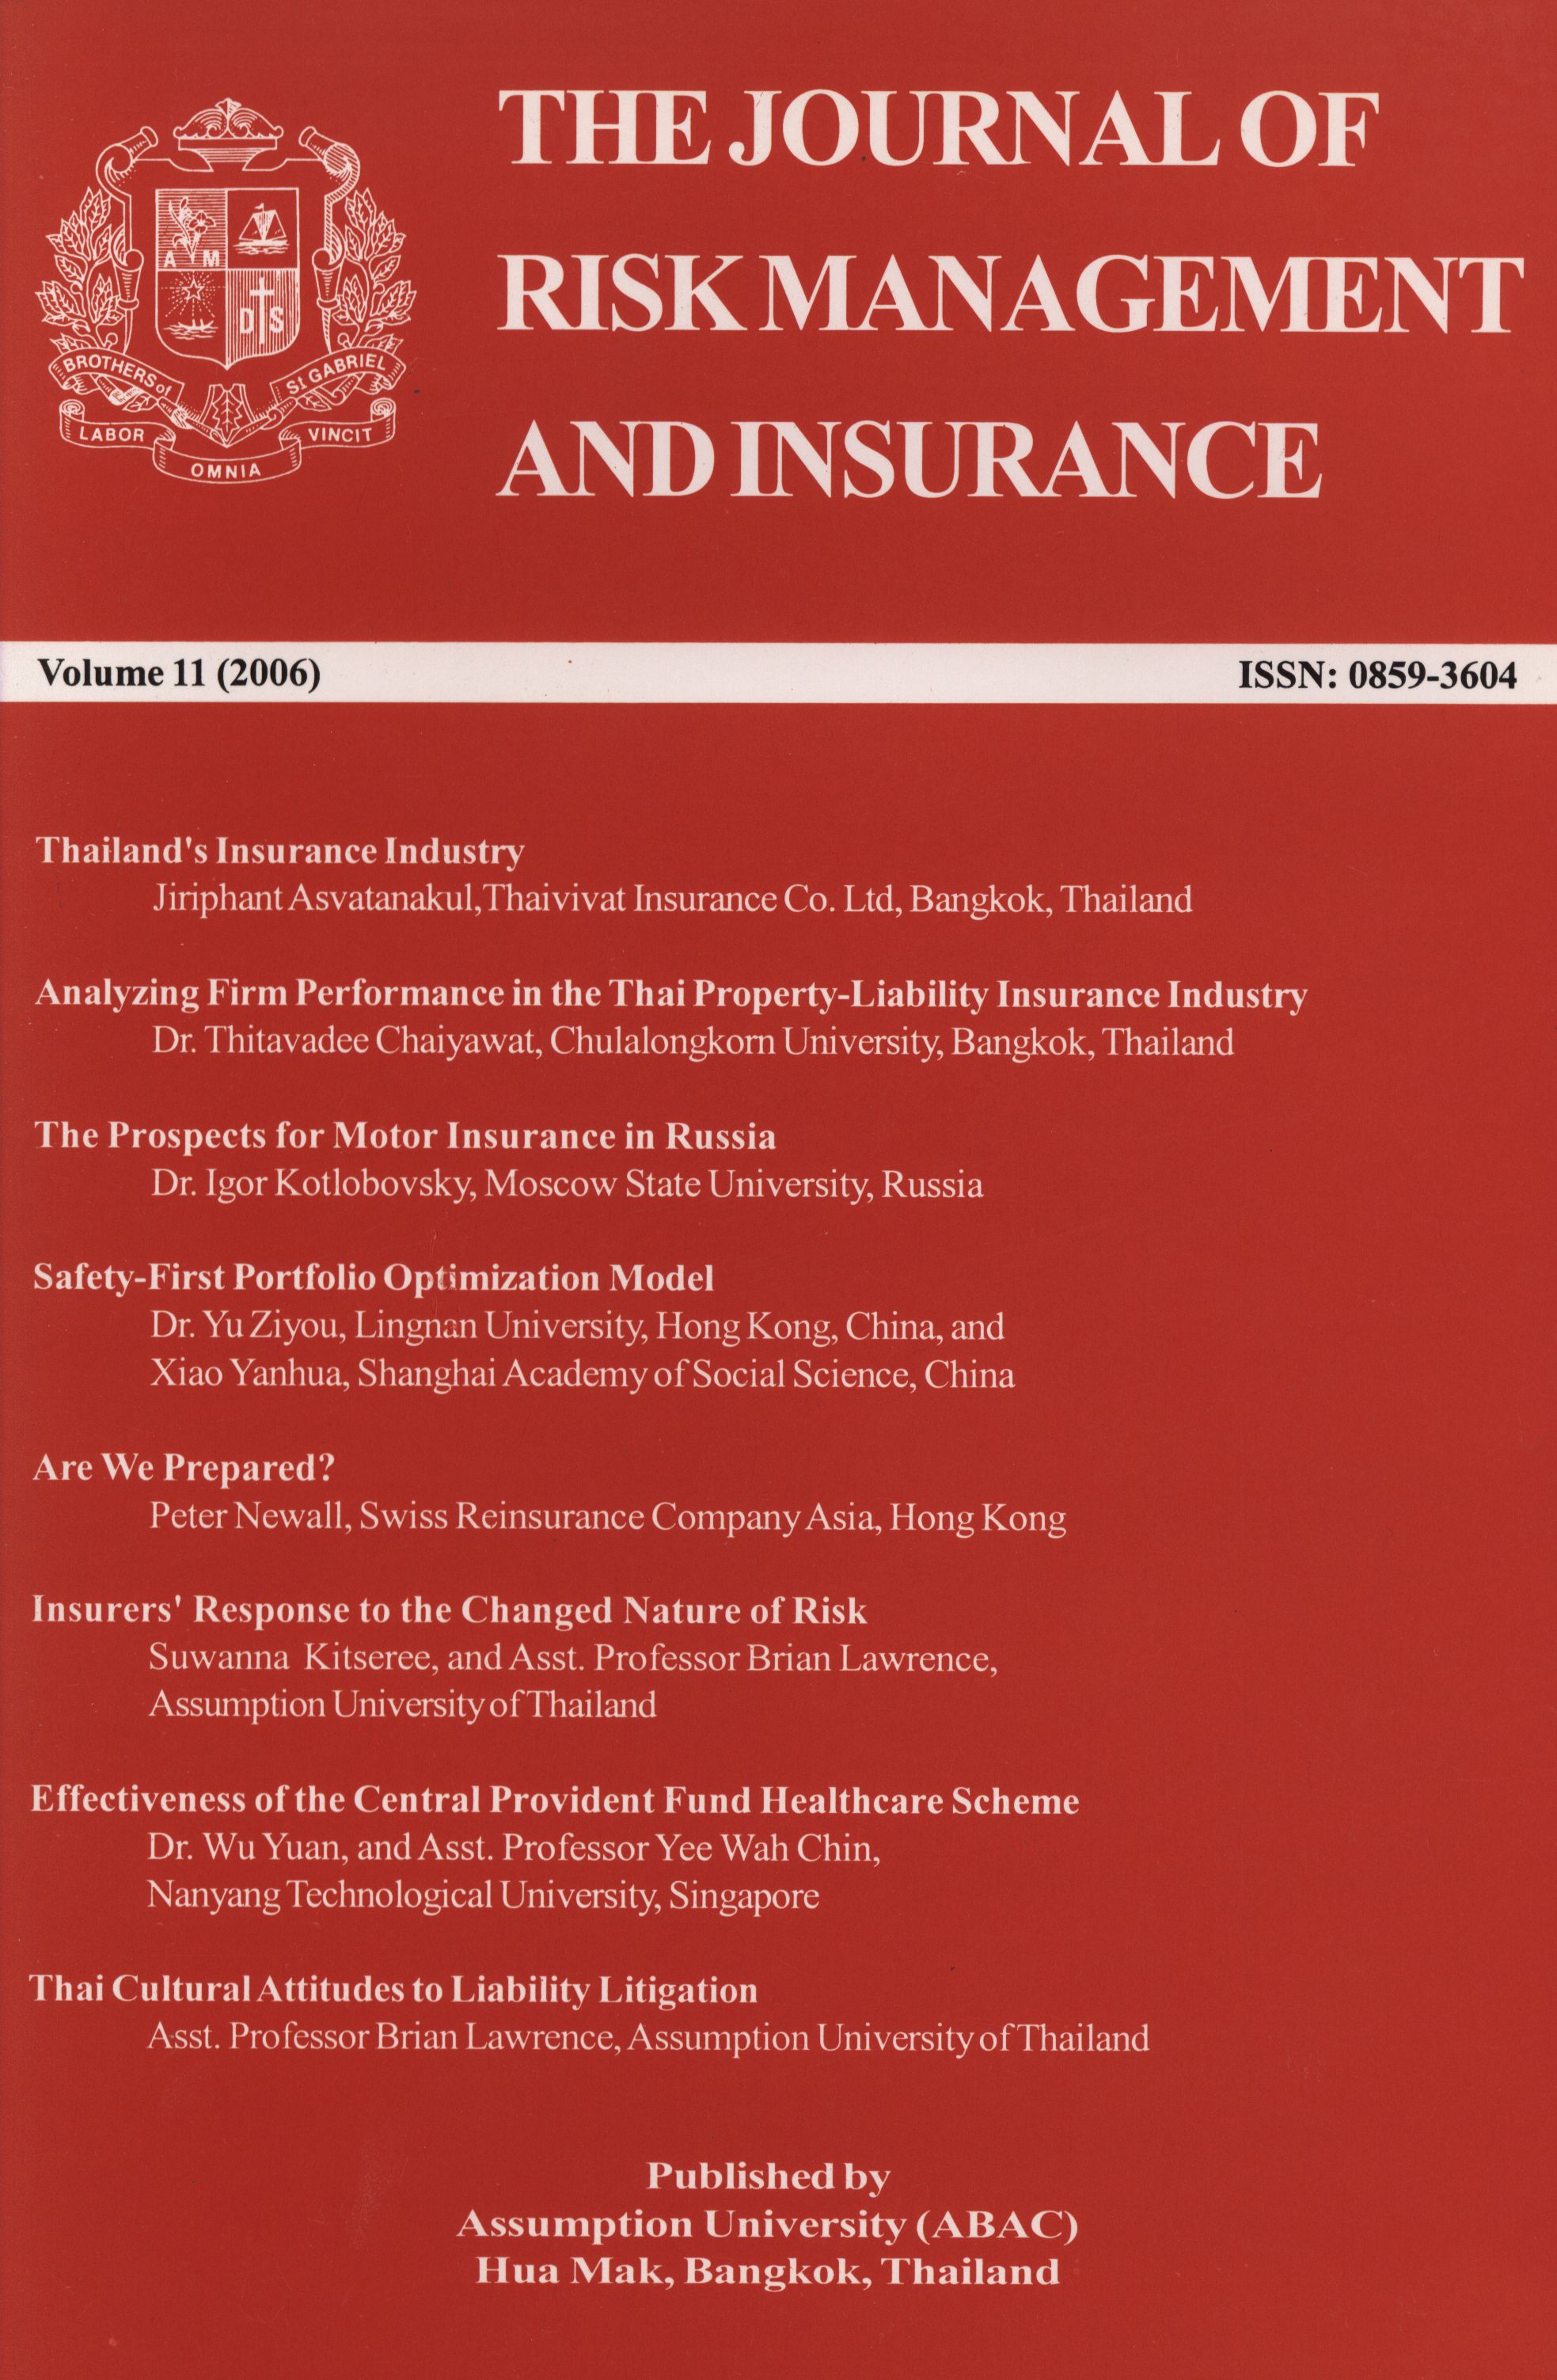 					View Vol. 11 No. 1 (2006): The Journal of Risk Management and Insurance
				